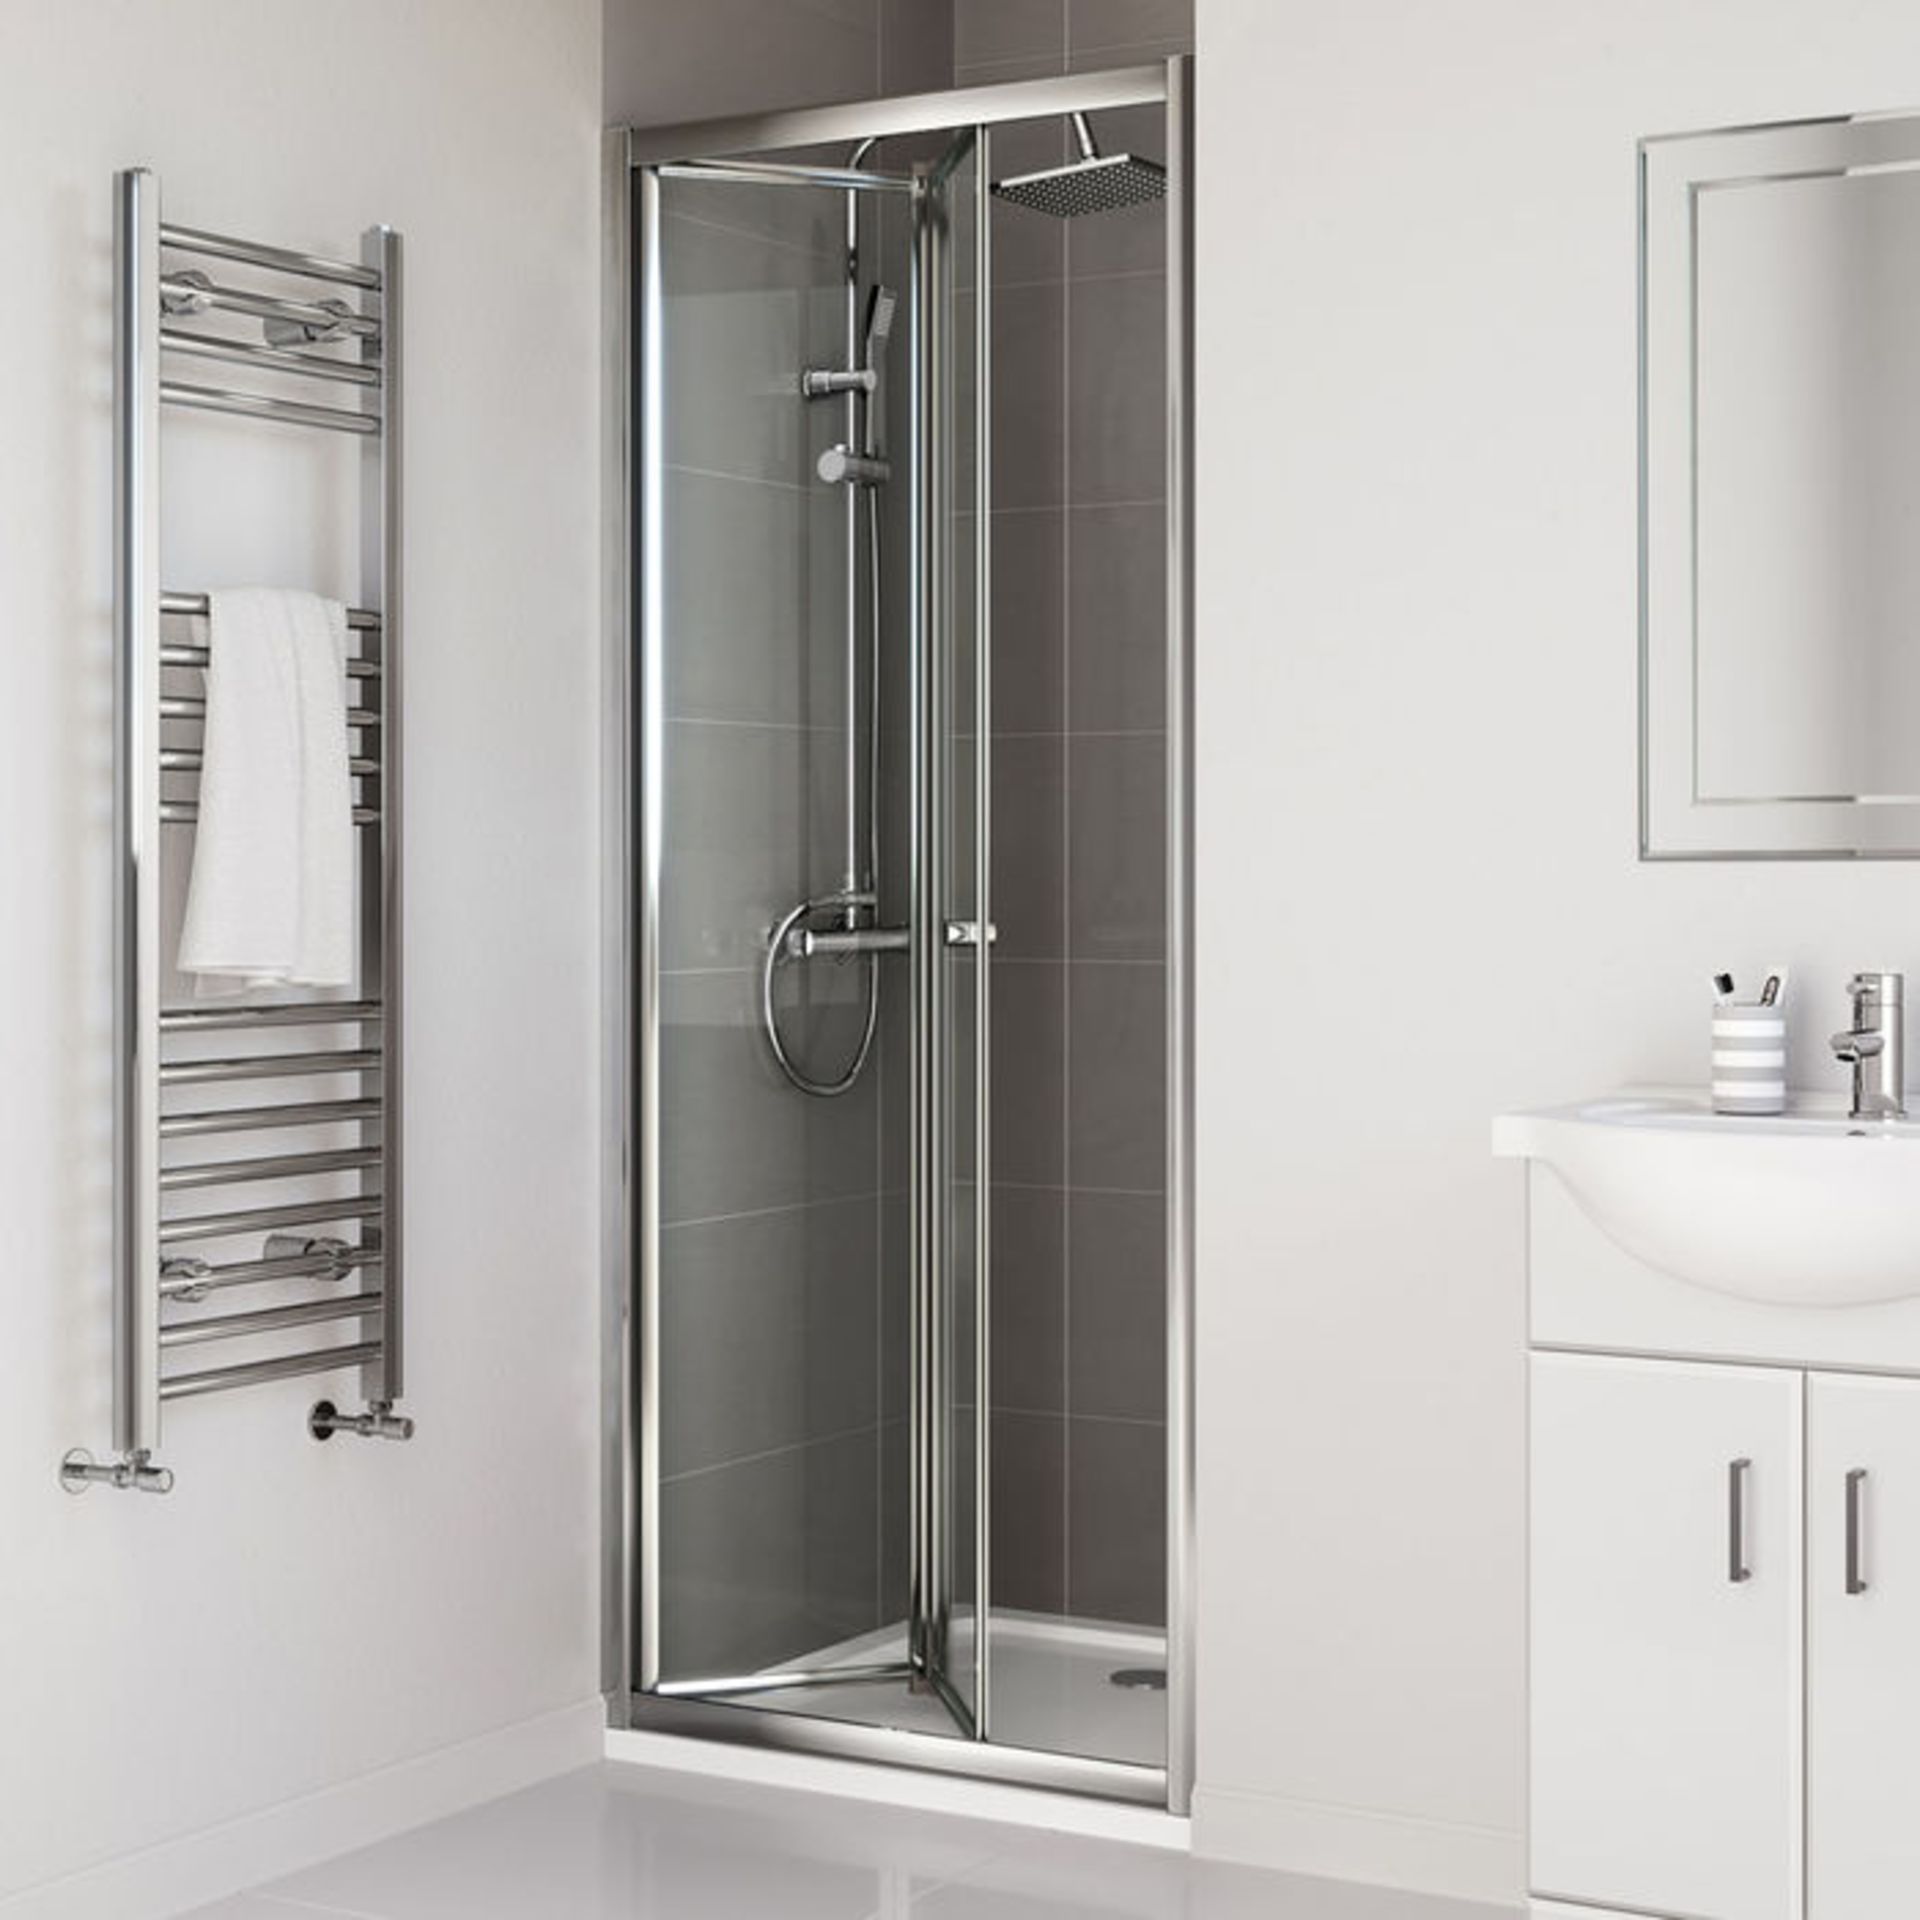 (PO14) 700mm - Elements Bi Fold Shower Door. RRP £299.99.4mm Safety GlassFully waterproof tested - Image 2 of 3